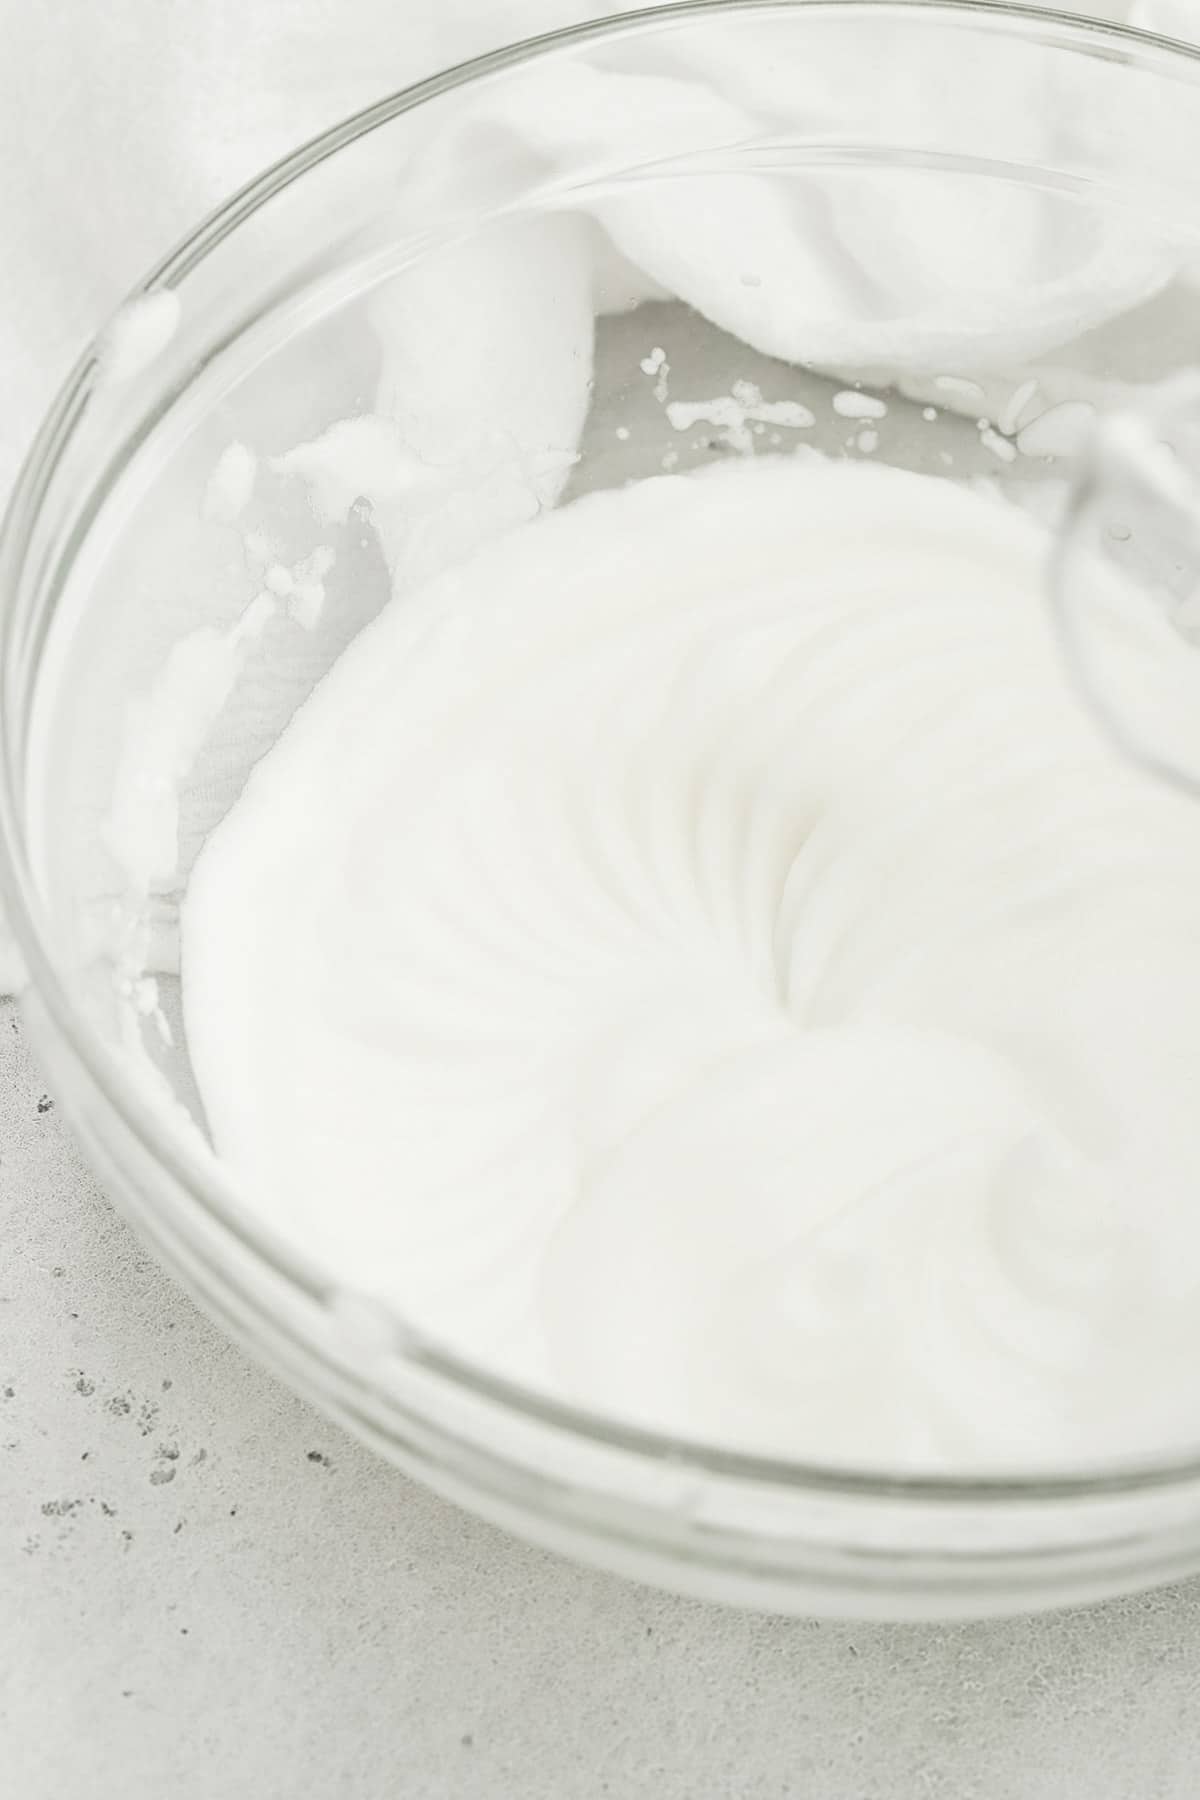 Close up view of whipped egg whites